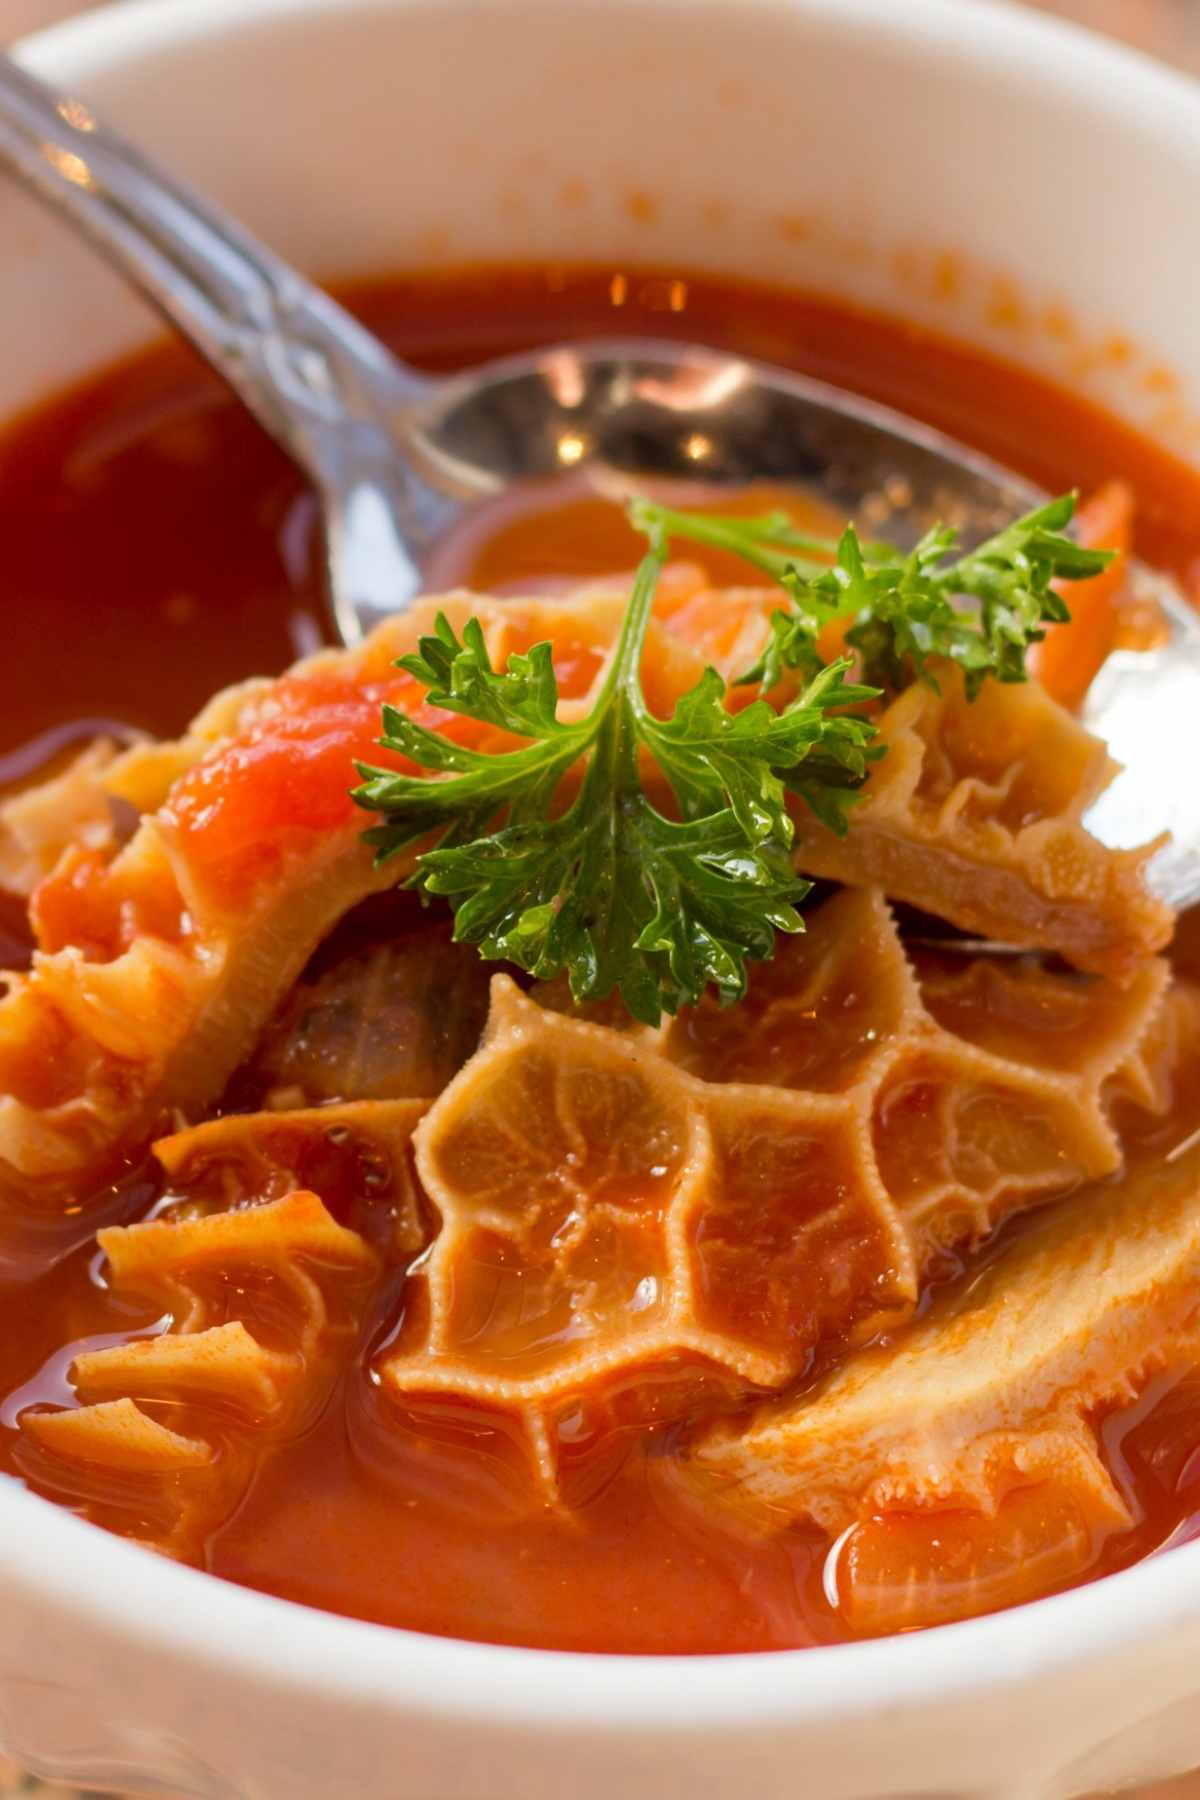 When you think about tripe, does it make you feel unsure? That’s probably because you haven’t had it or the tripe you’ve tasted wasn’t well prepared. Tripe is actually very delicious when it’s properly cooked.